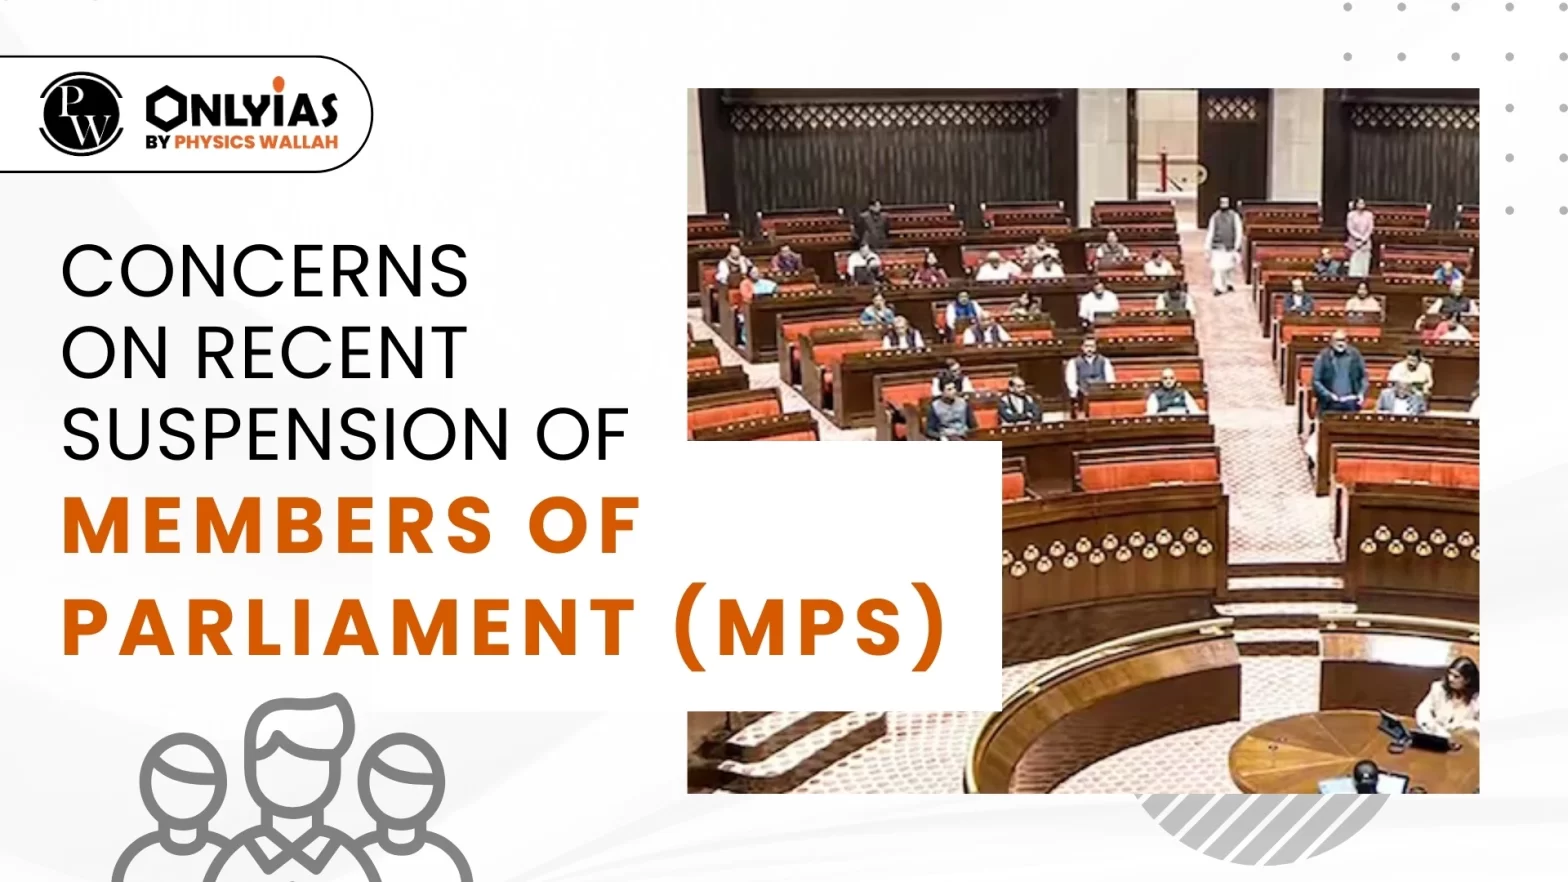 Concerns on Recent Suspension of Members of Parliament (MPs)